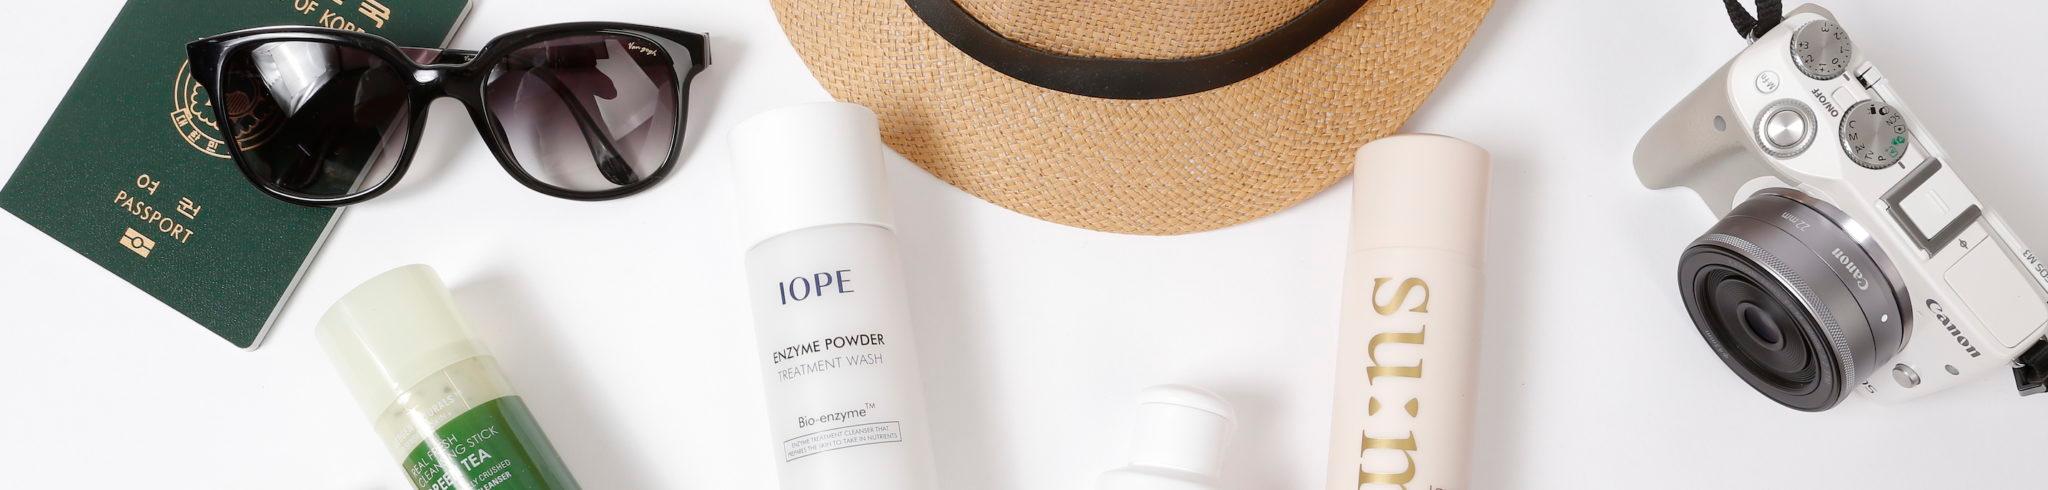 2 Must-Have, TSA-Friendly Cleansers For Your Next Trip